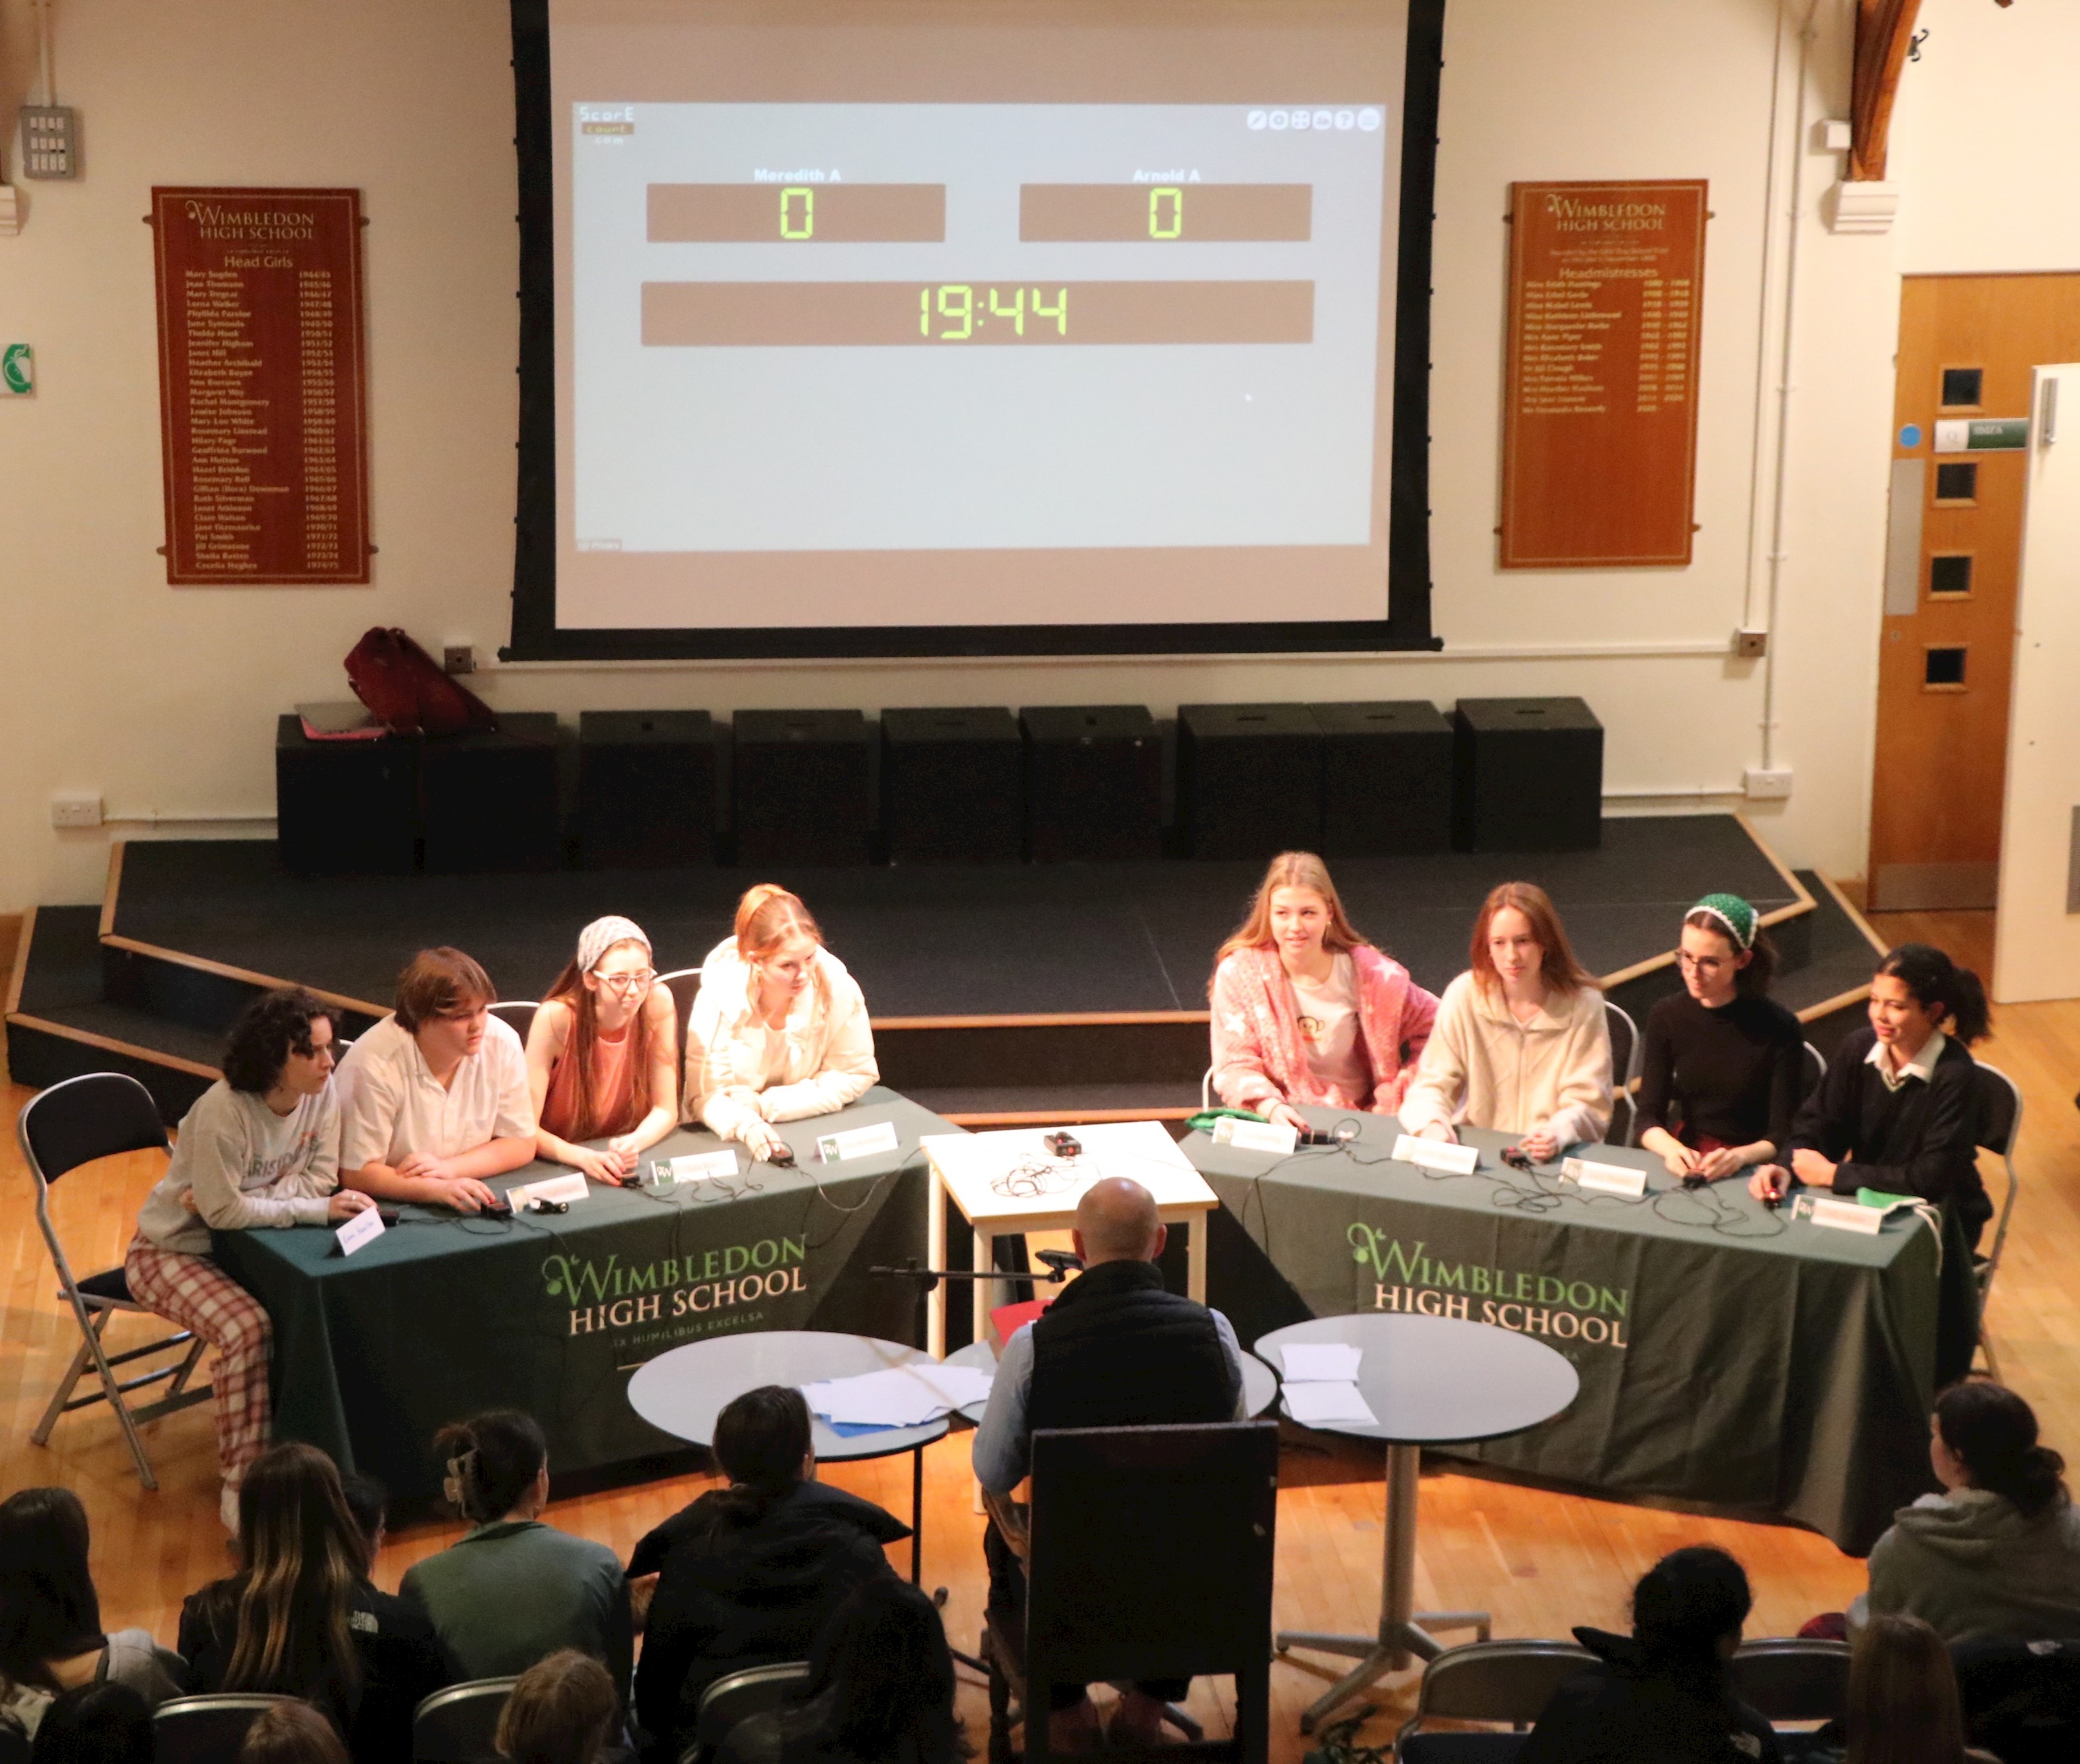 And the winner of House University Challenge is...